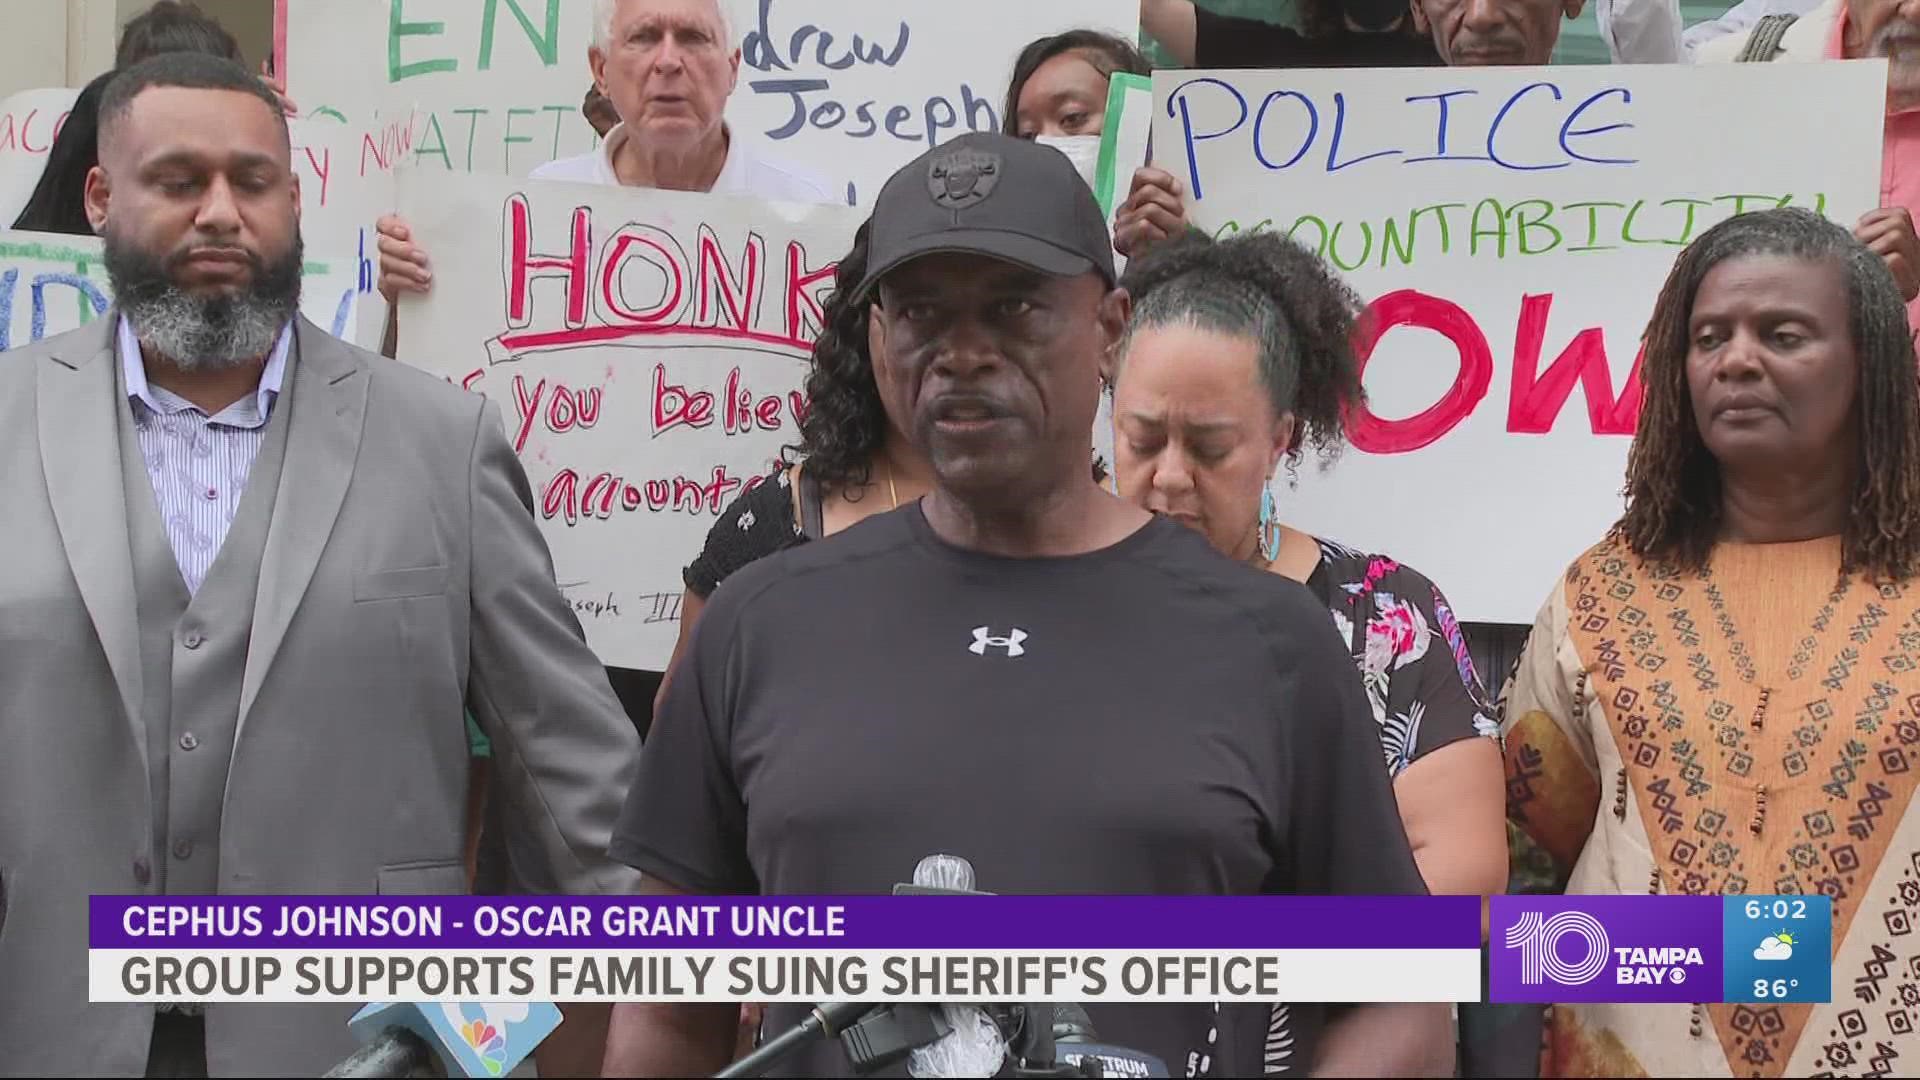 The parents of Andrew Joseph III are suing the Hillsborough County Sheriff’s Office and blaming them for their 14-year-old son’s death.